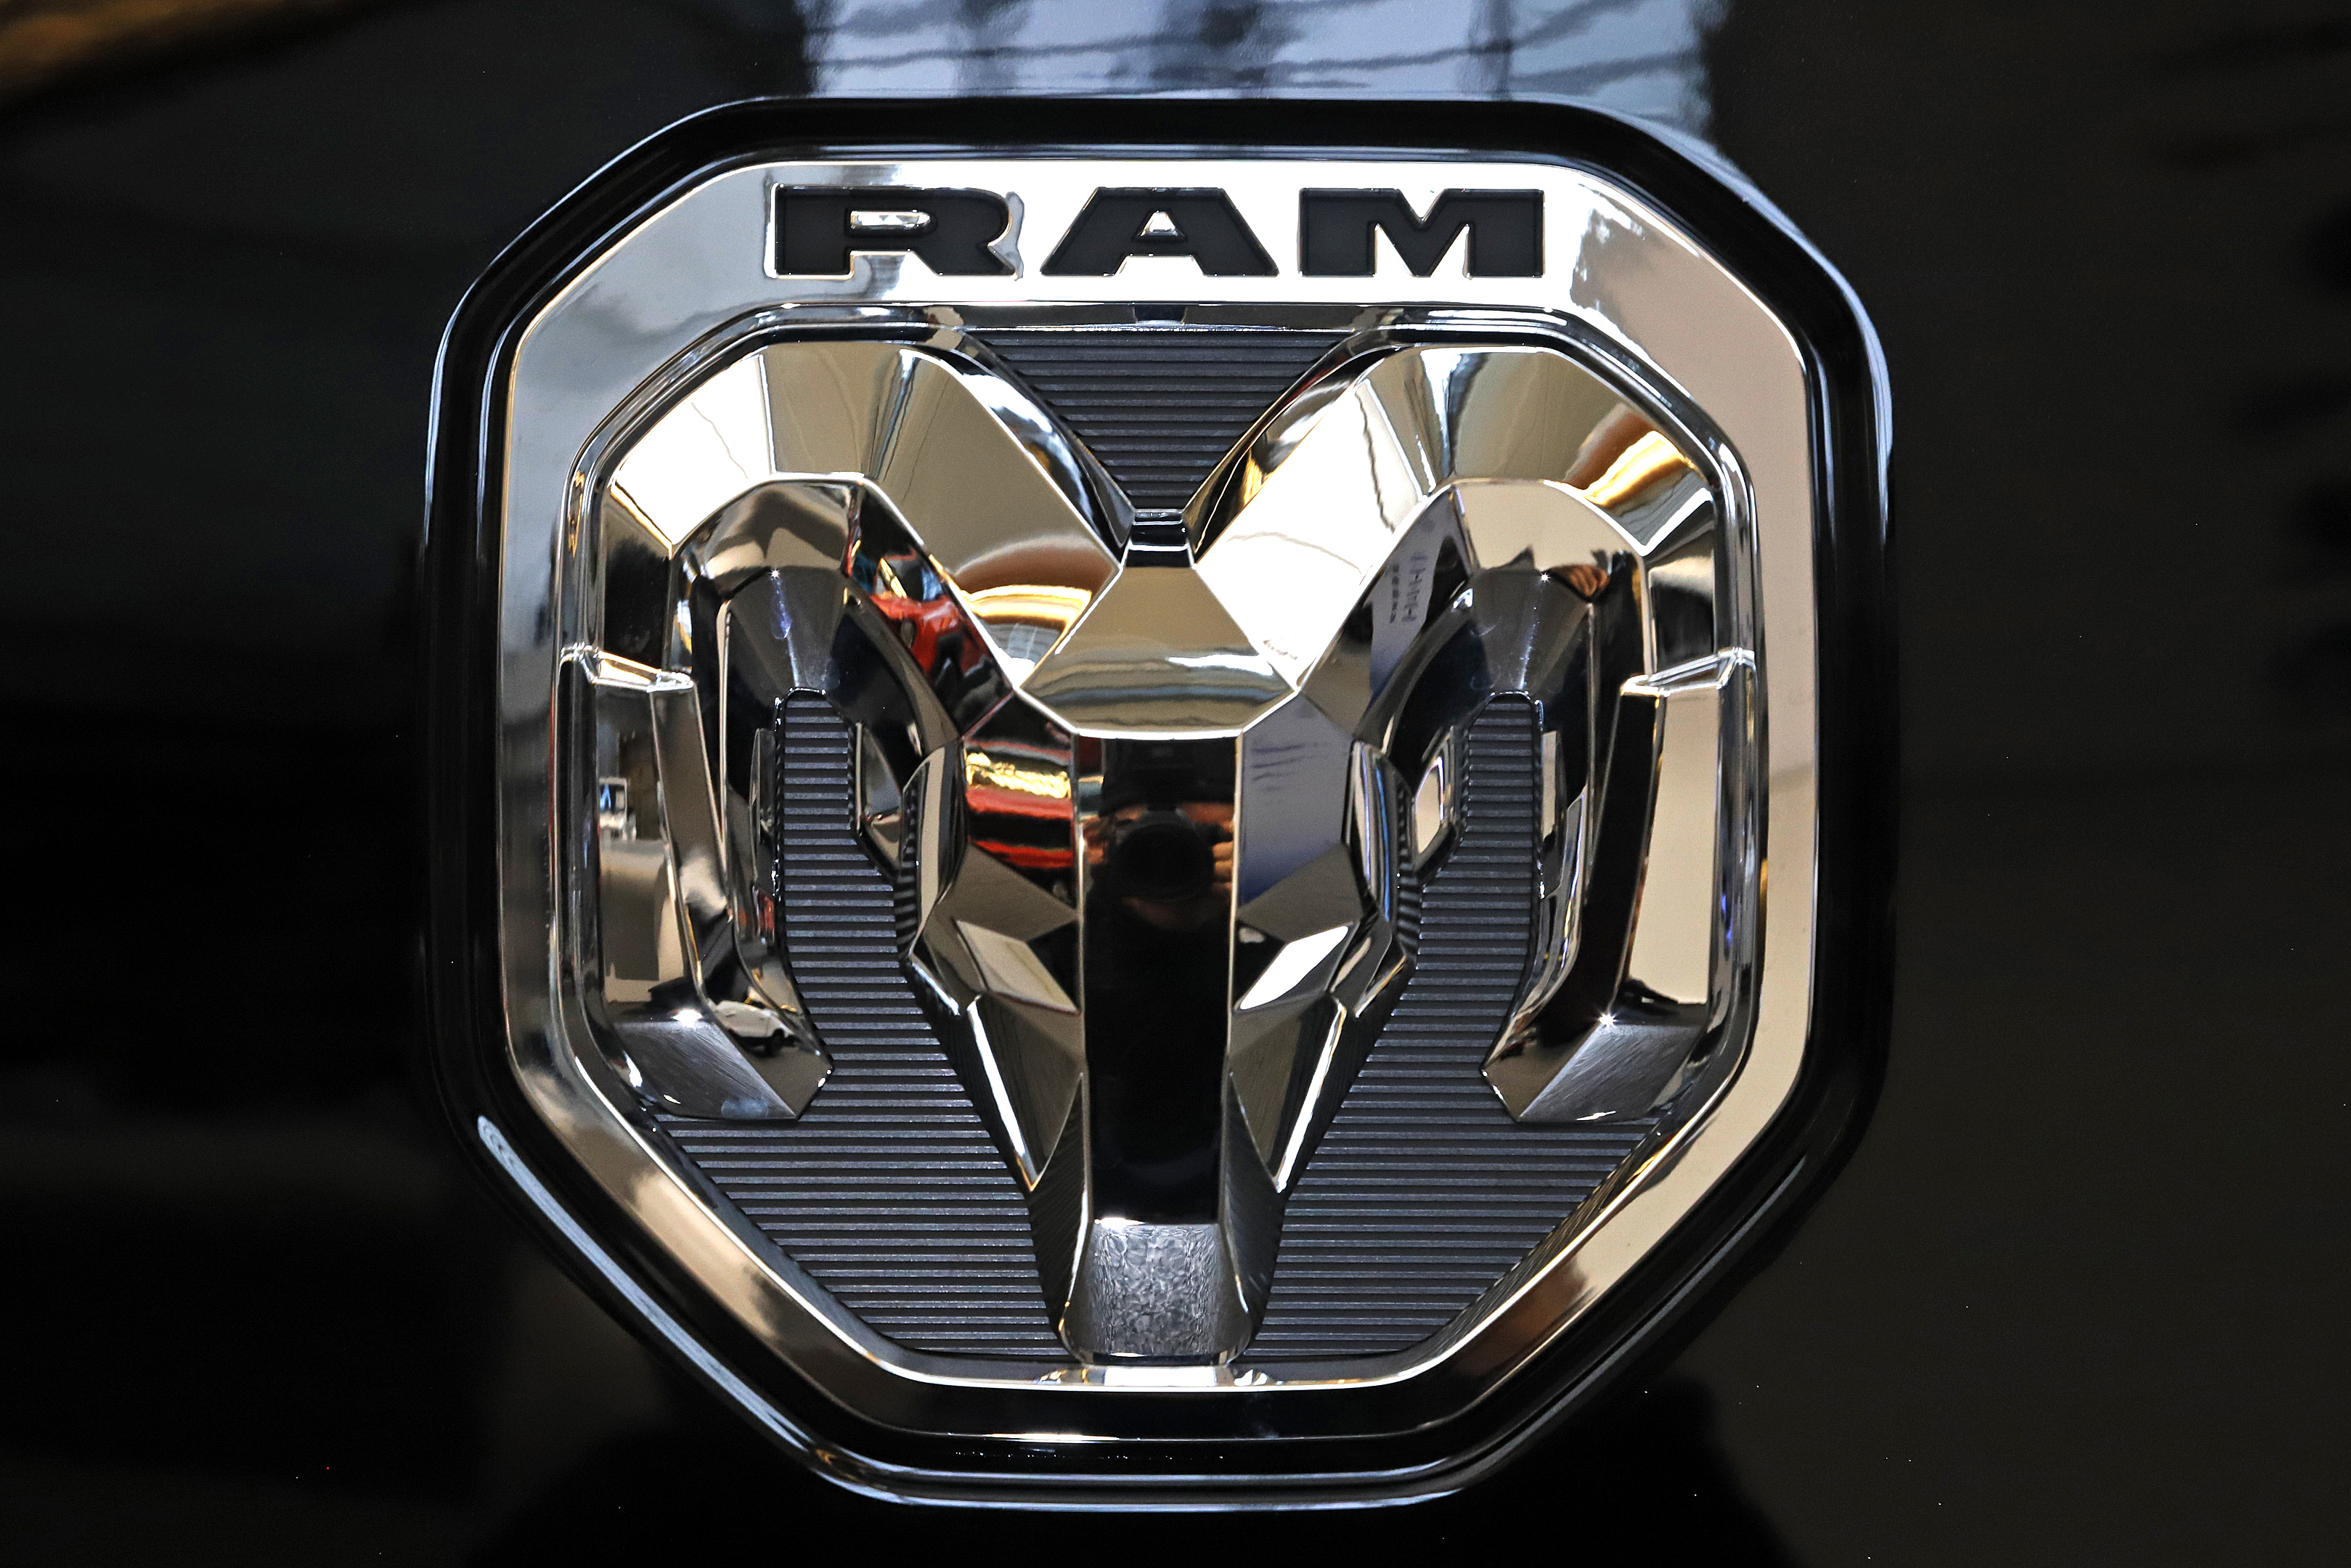 Fiat Chrysler shifter woes continue: Ram, Dodge rotary knob